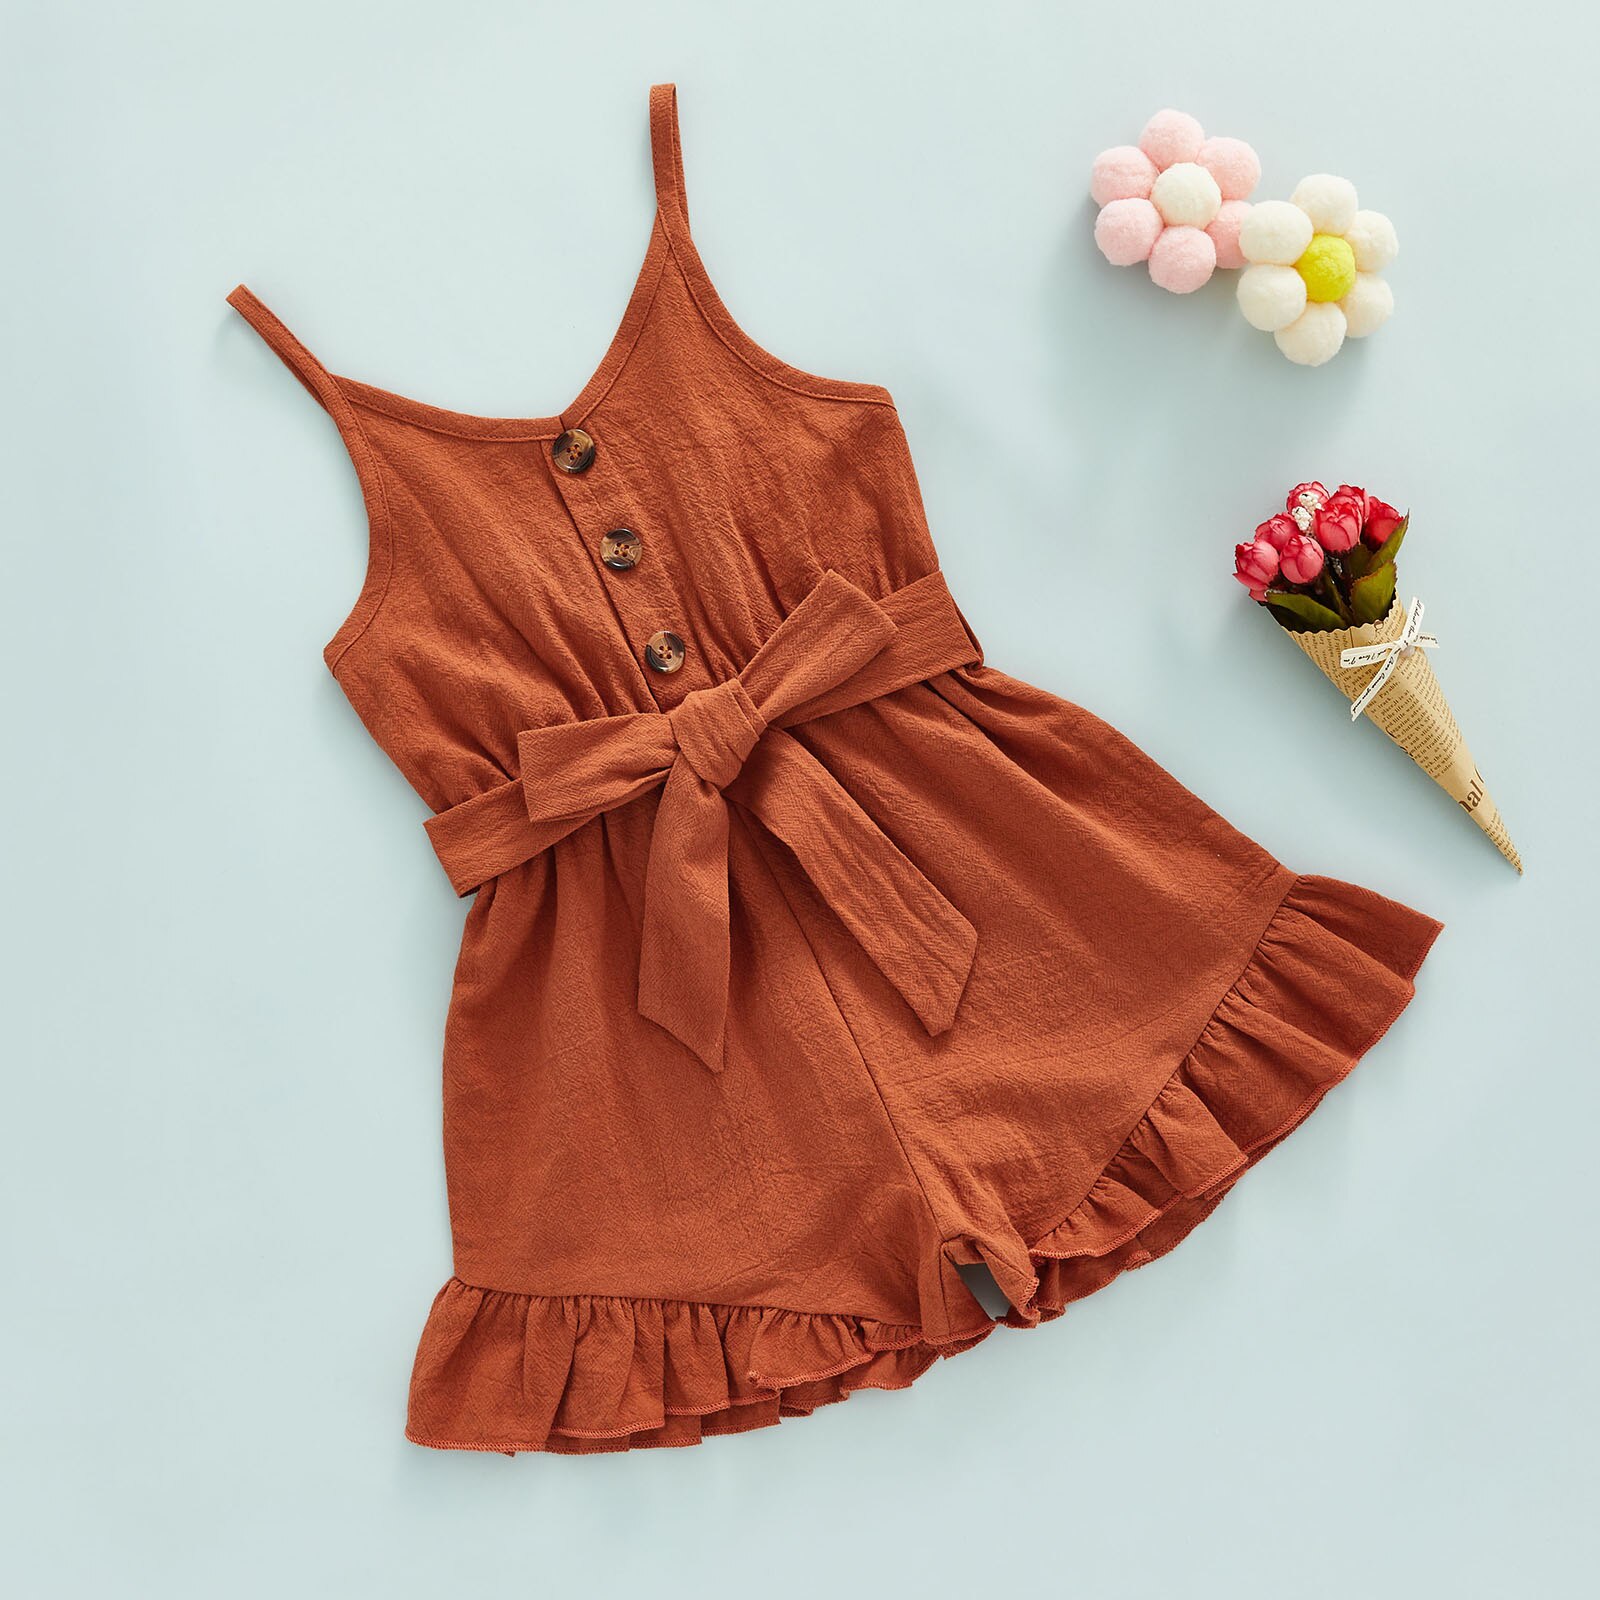 Toddler-Kid-Baby-Girls-Sling-Playsuit-Spaghetti-Straps-V-Neck-Buttons-Sleeveless-Ruffle-Hem-Solid-Color-3